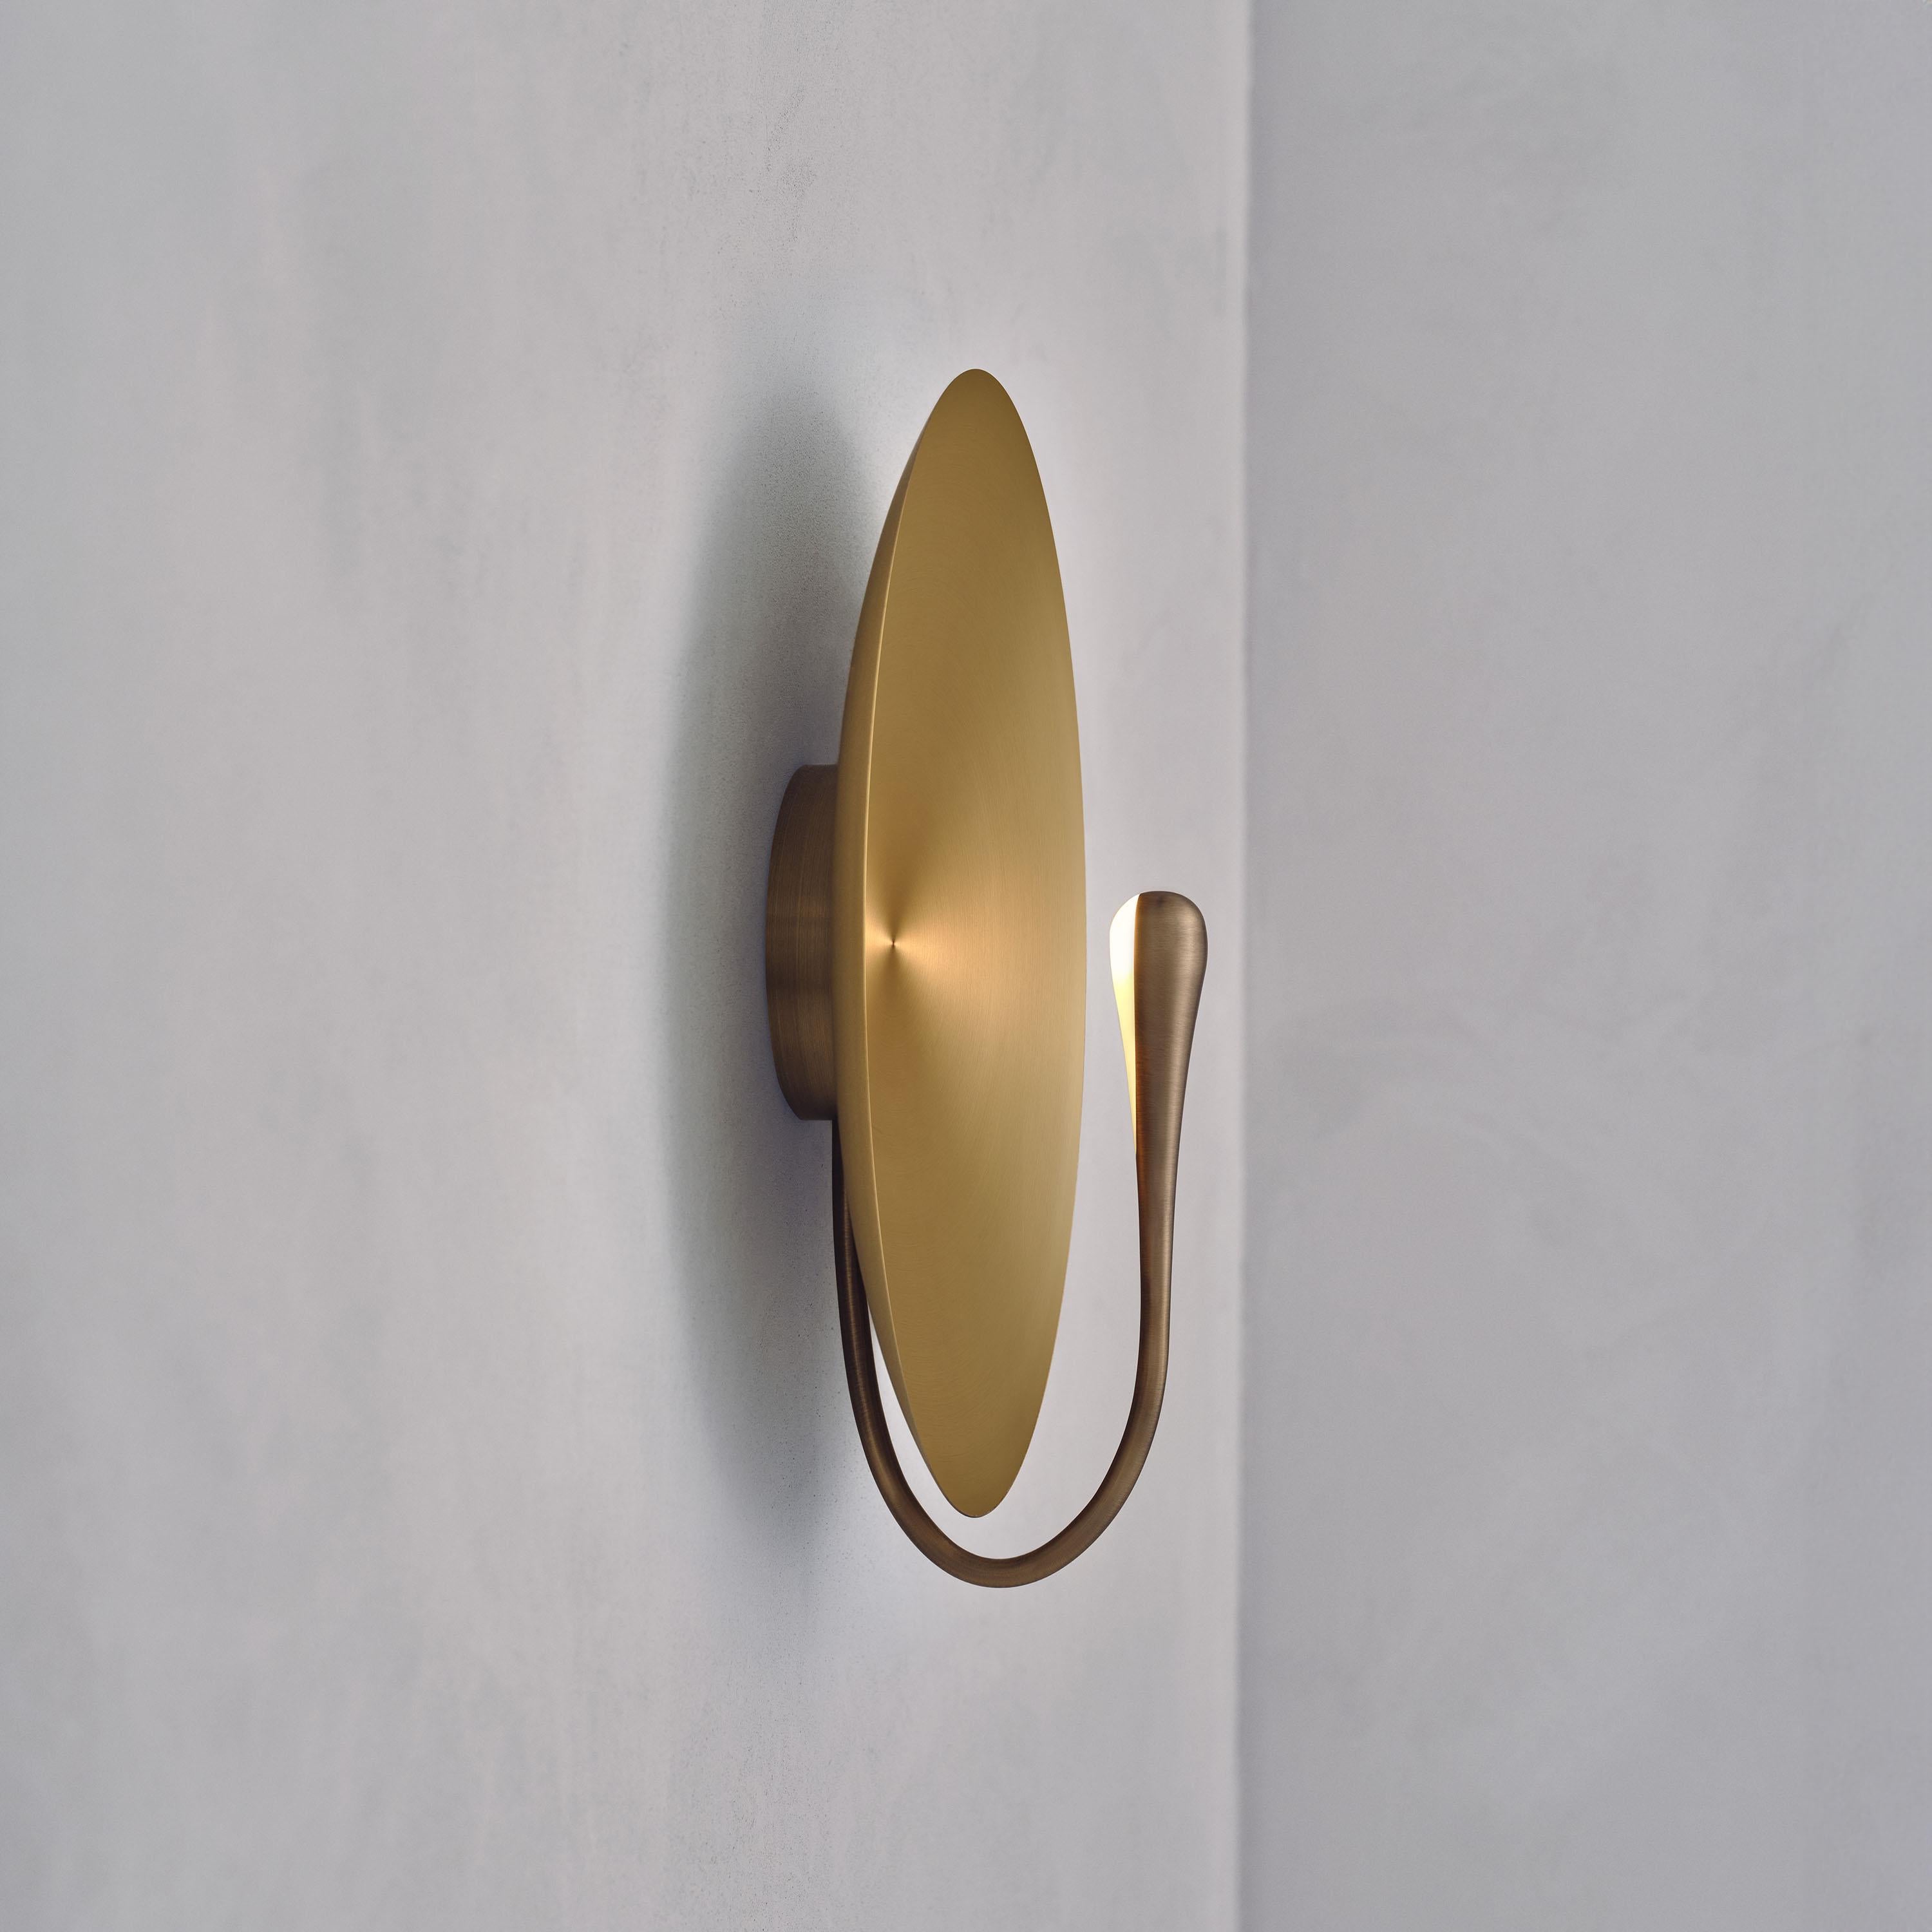 'Cosmic Sol' Handmade Brushed Brass Contemporary Wall Light, Sconce In New Condition For Sale In London, GB